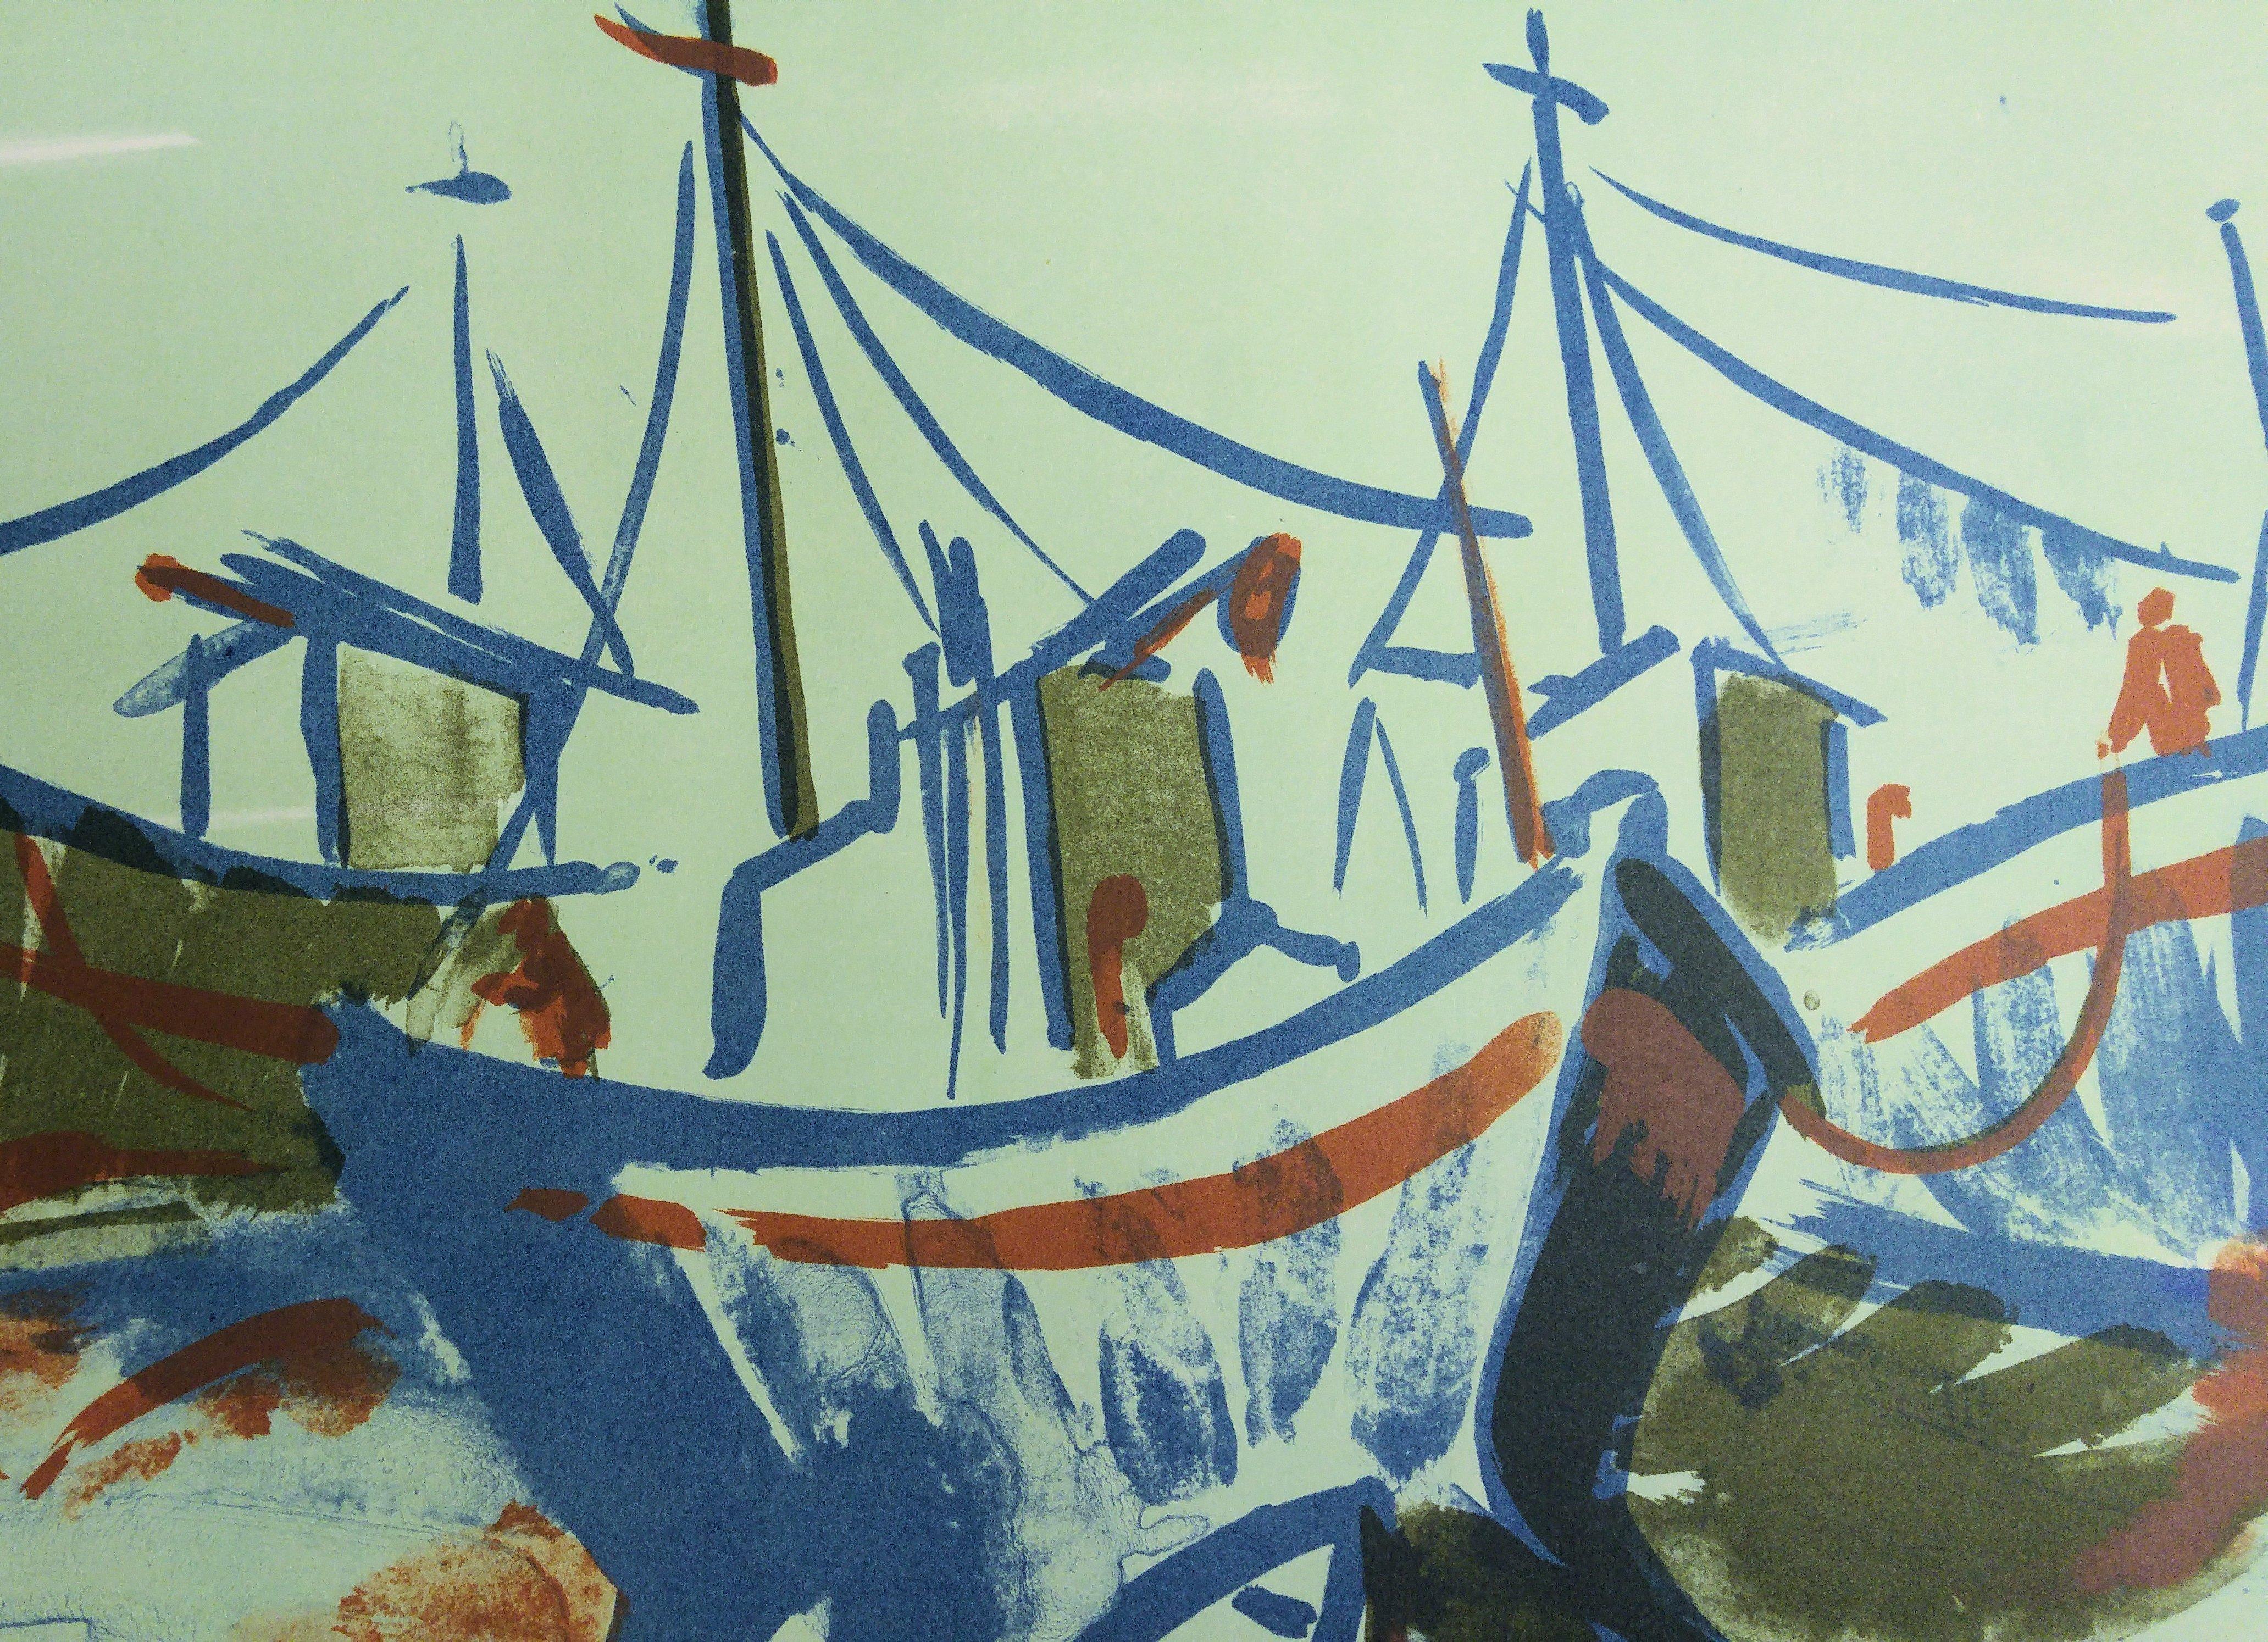 Three Boats - Original handsigned lithograph - 50 copies - Blue Landscape Print by Jean Helion